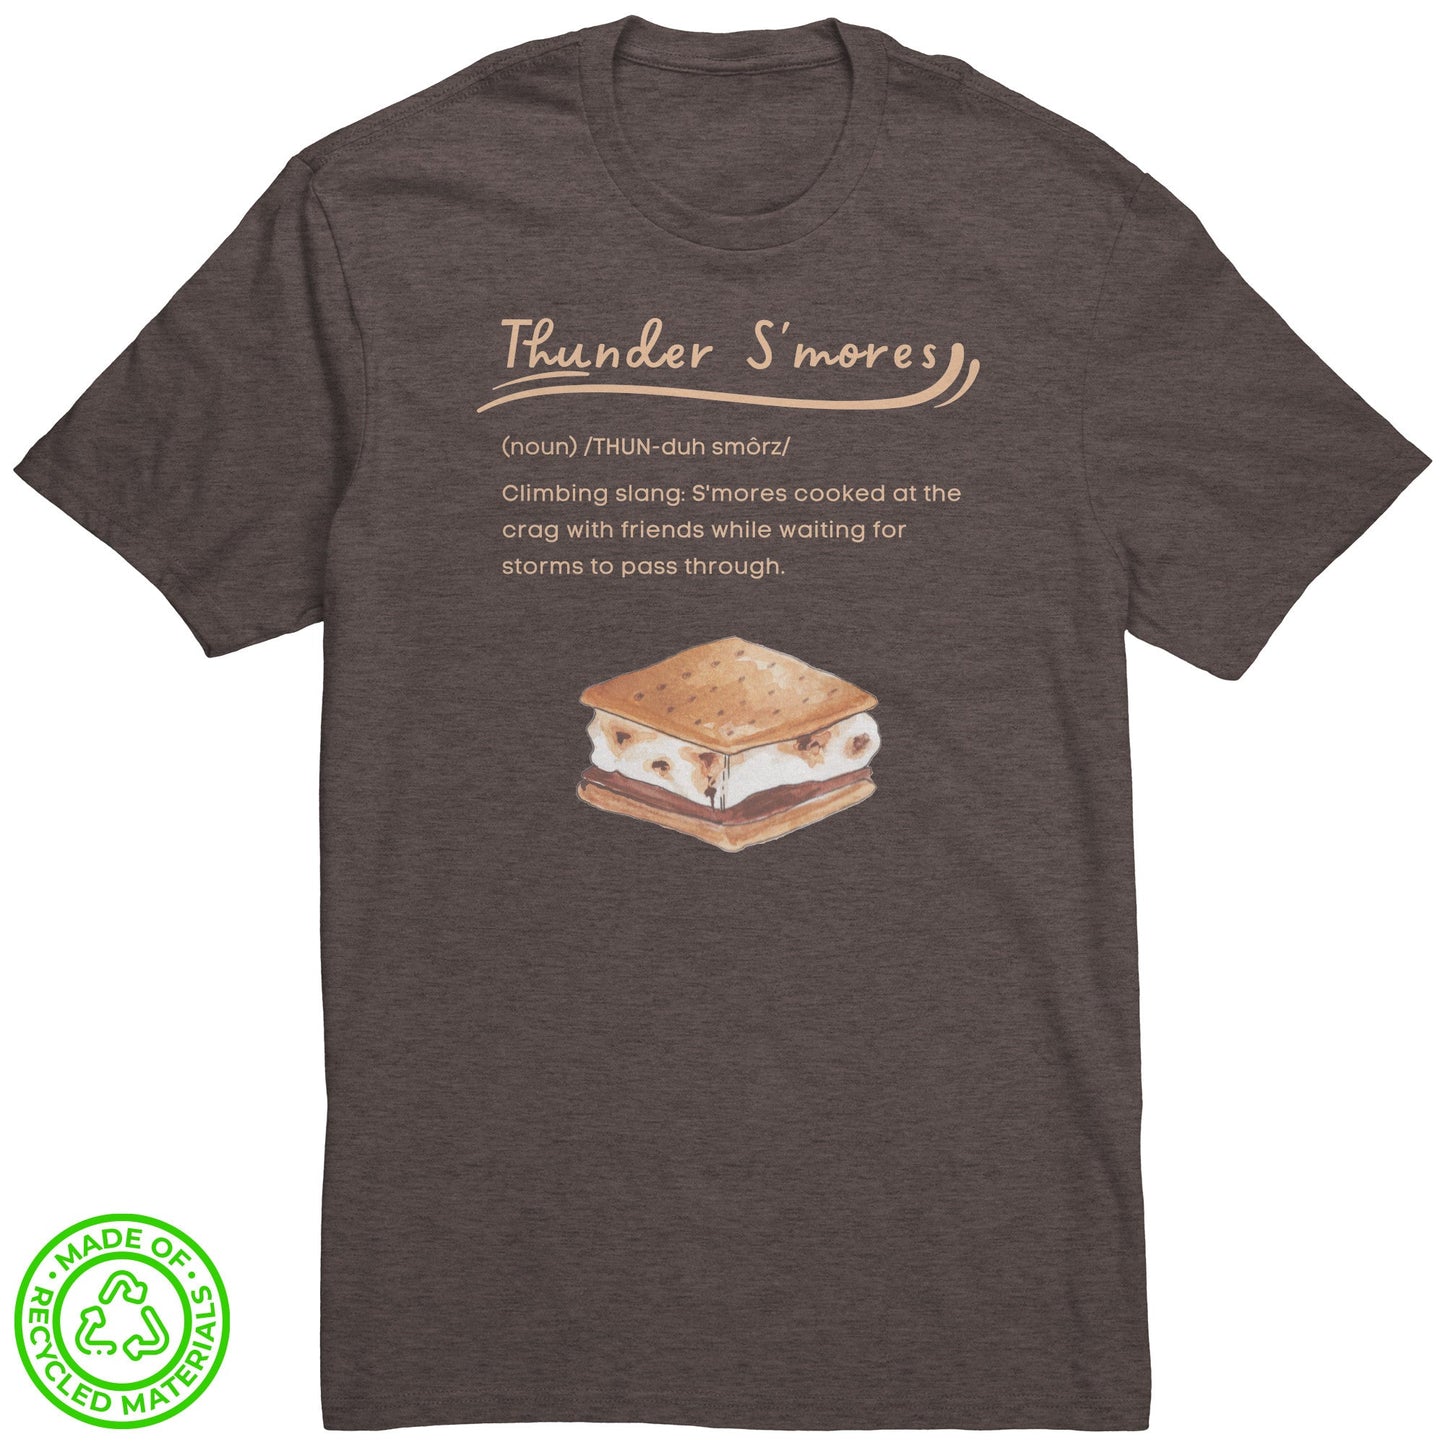 Eco-Friendly Re-Tee (Thunder S'mores)